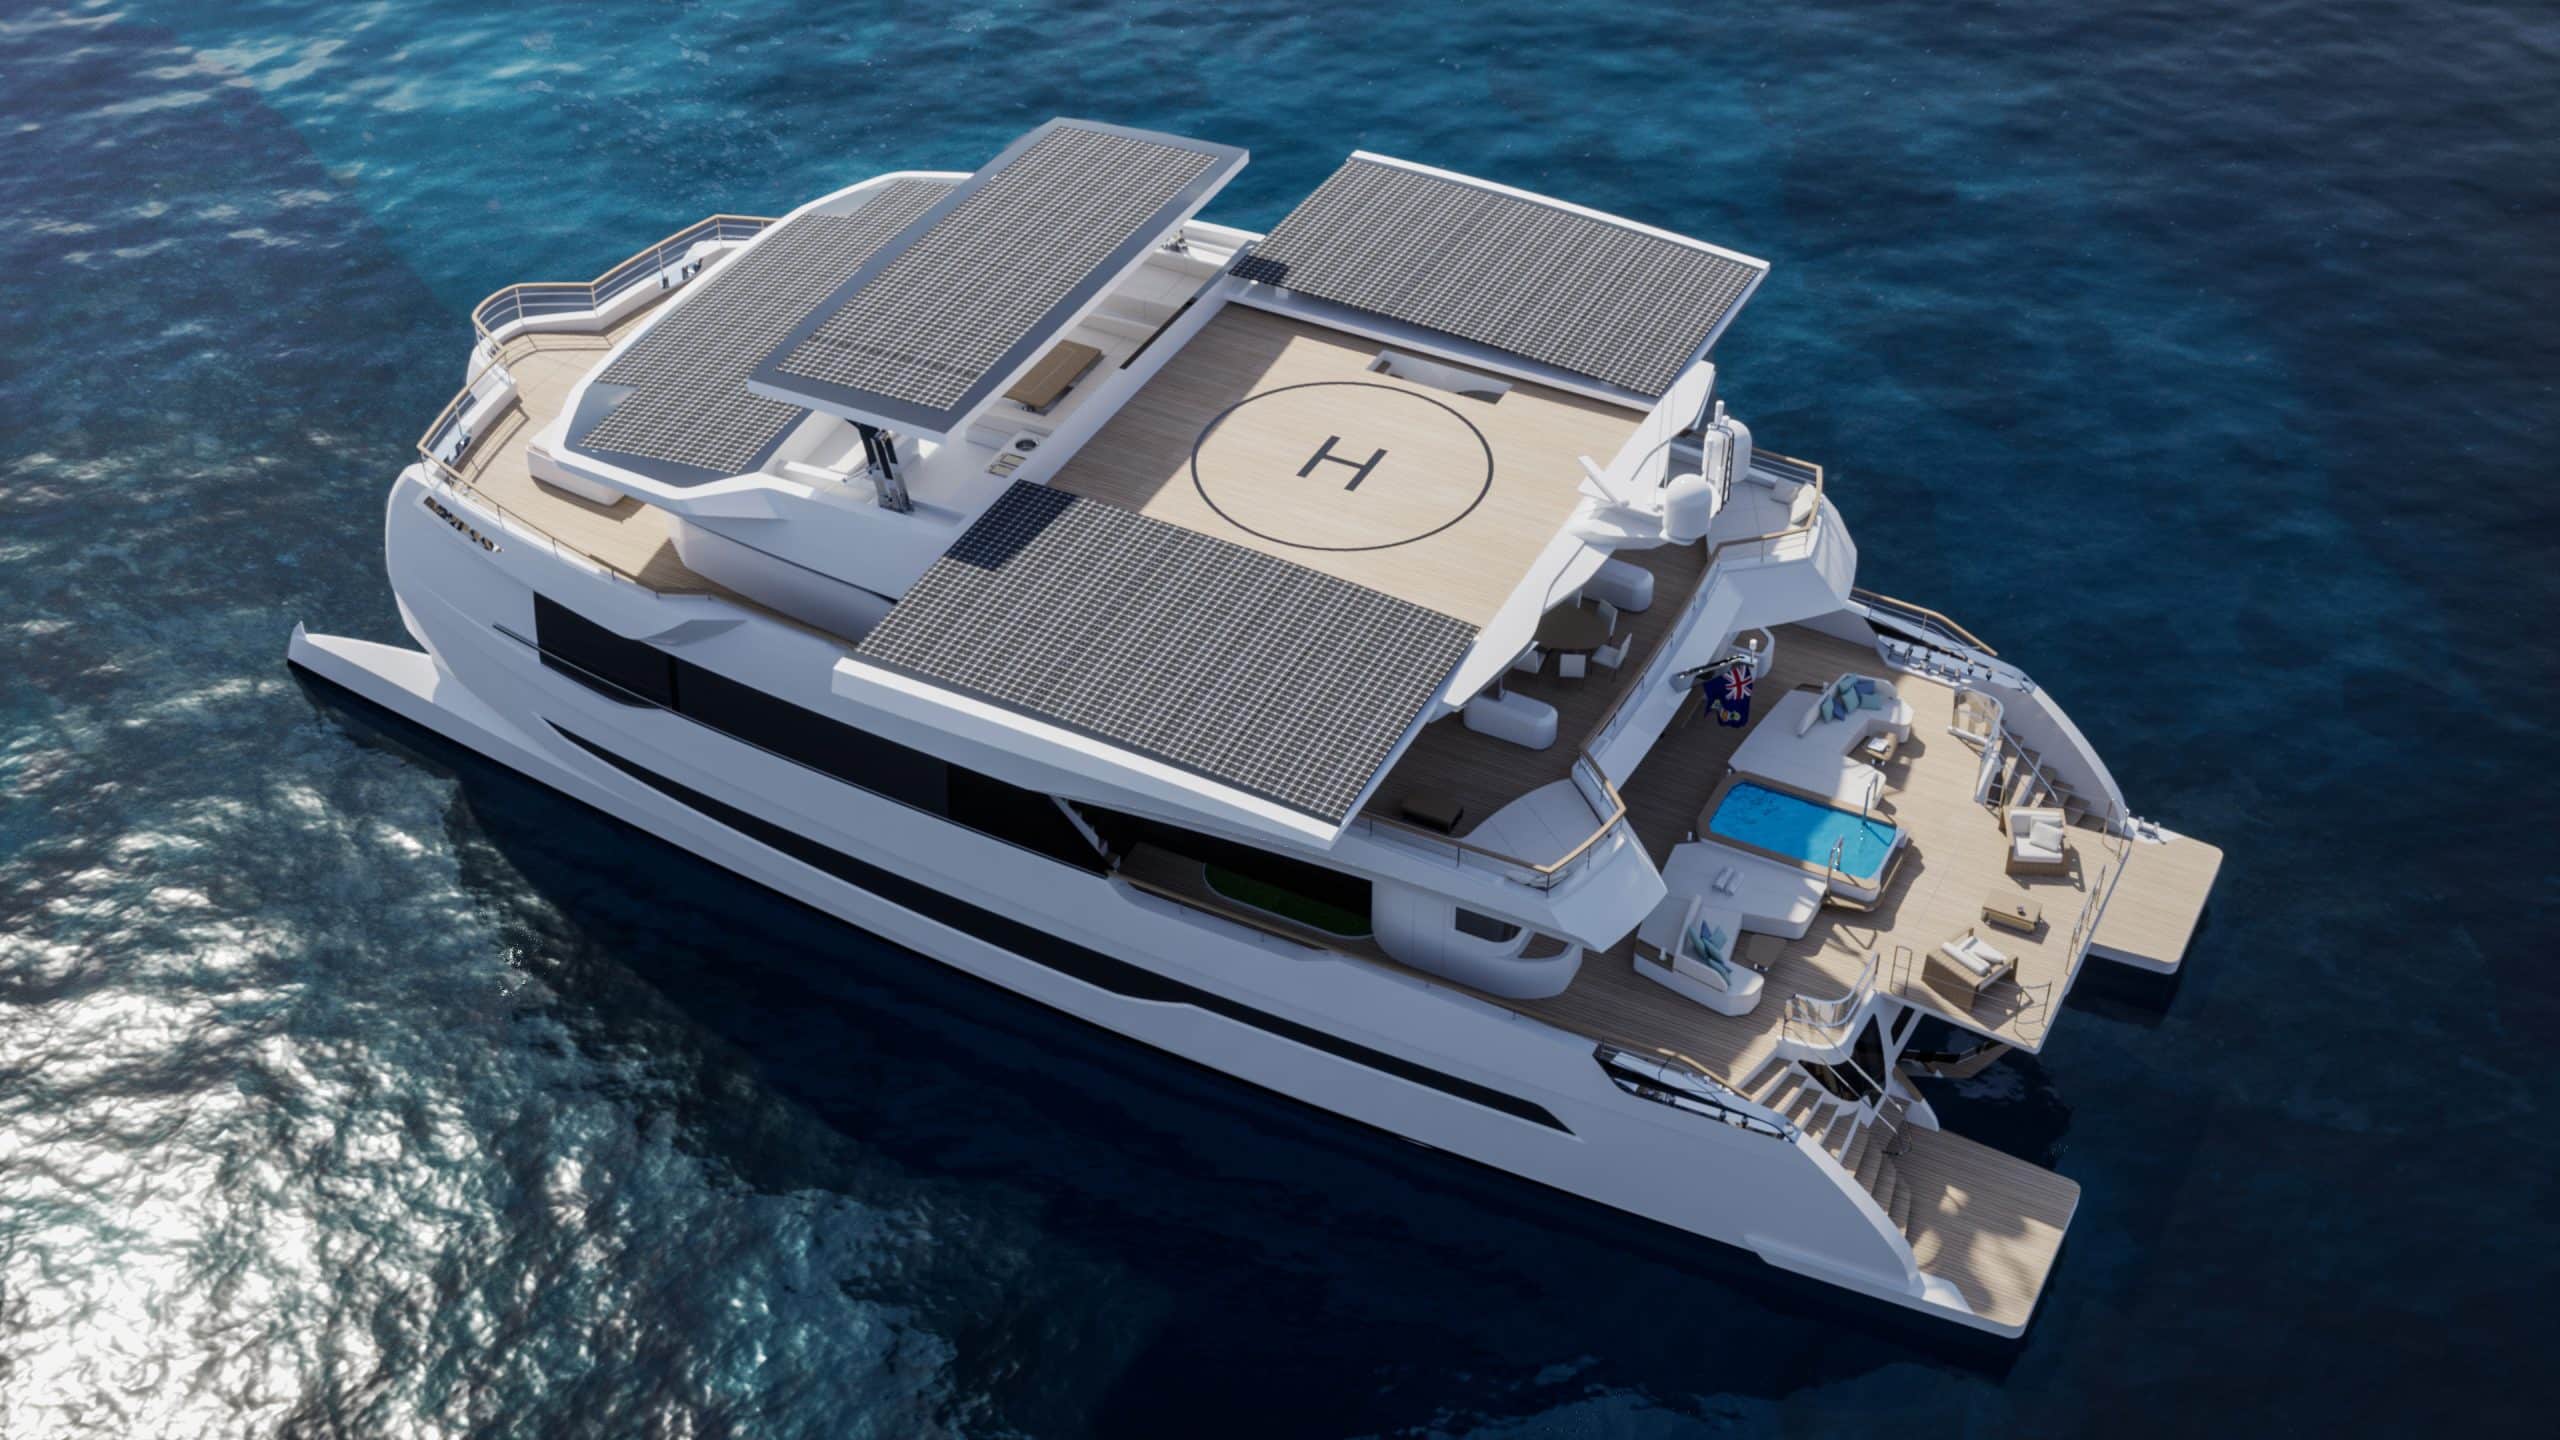 Yacht with solar panels on the upper deck and a helipad in the center